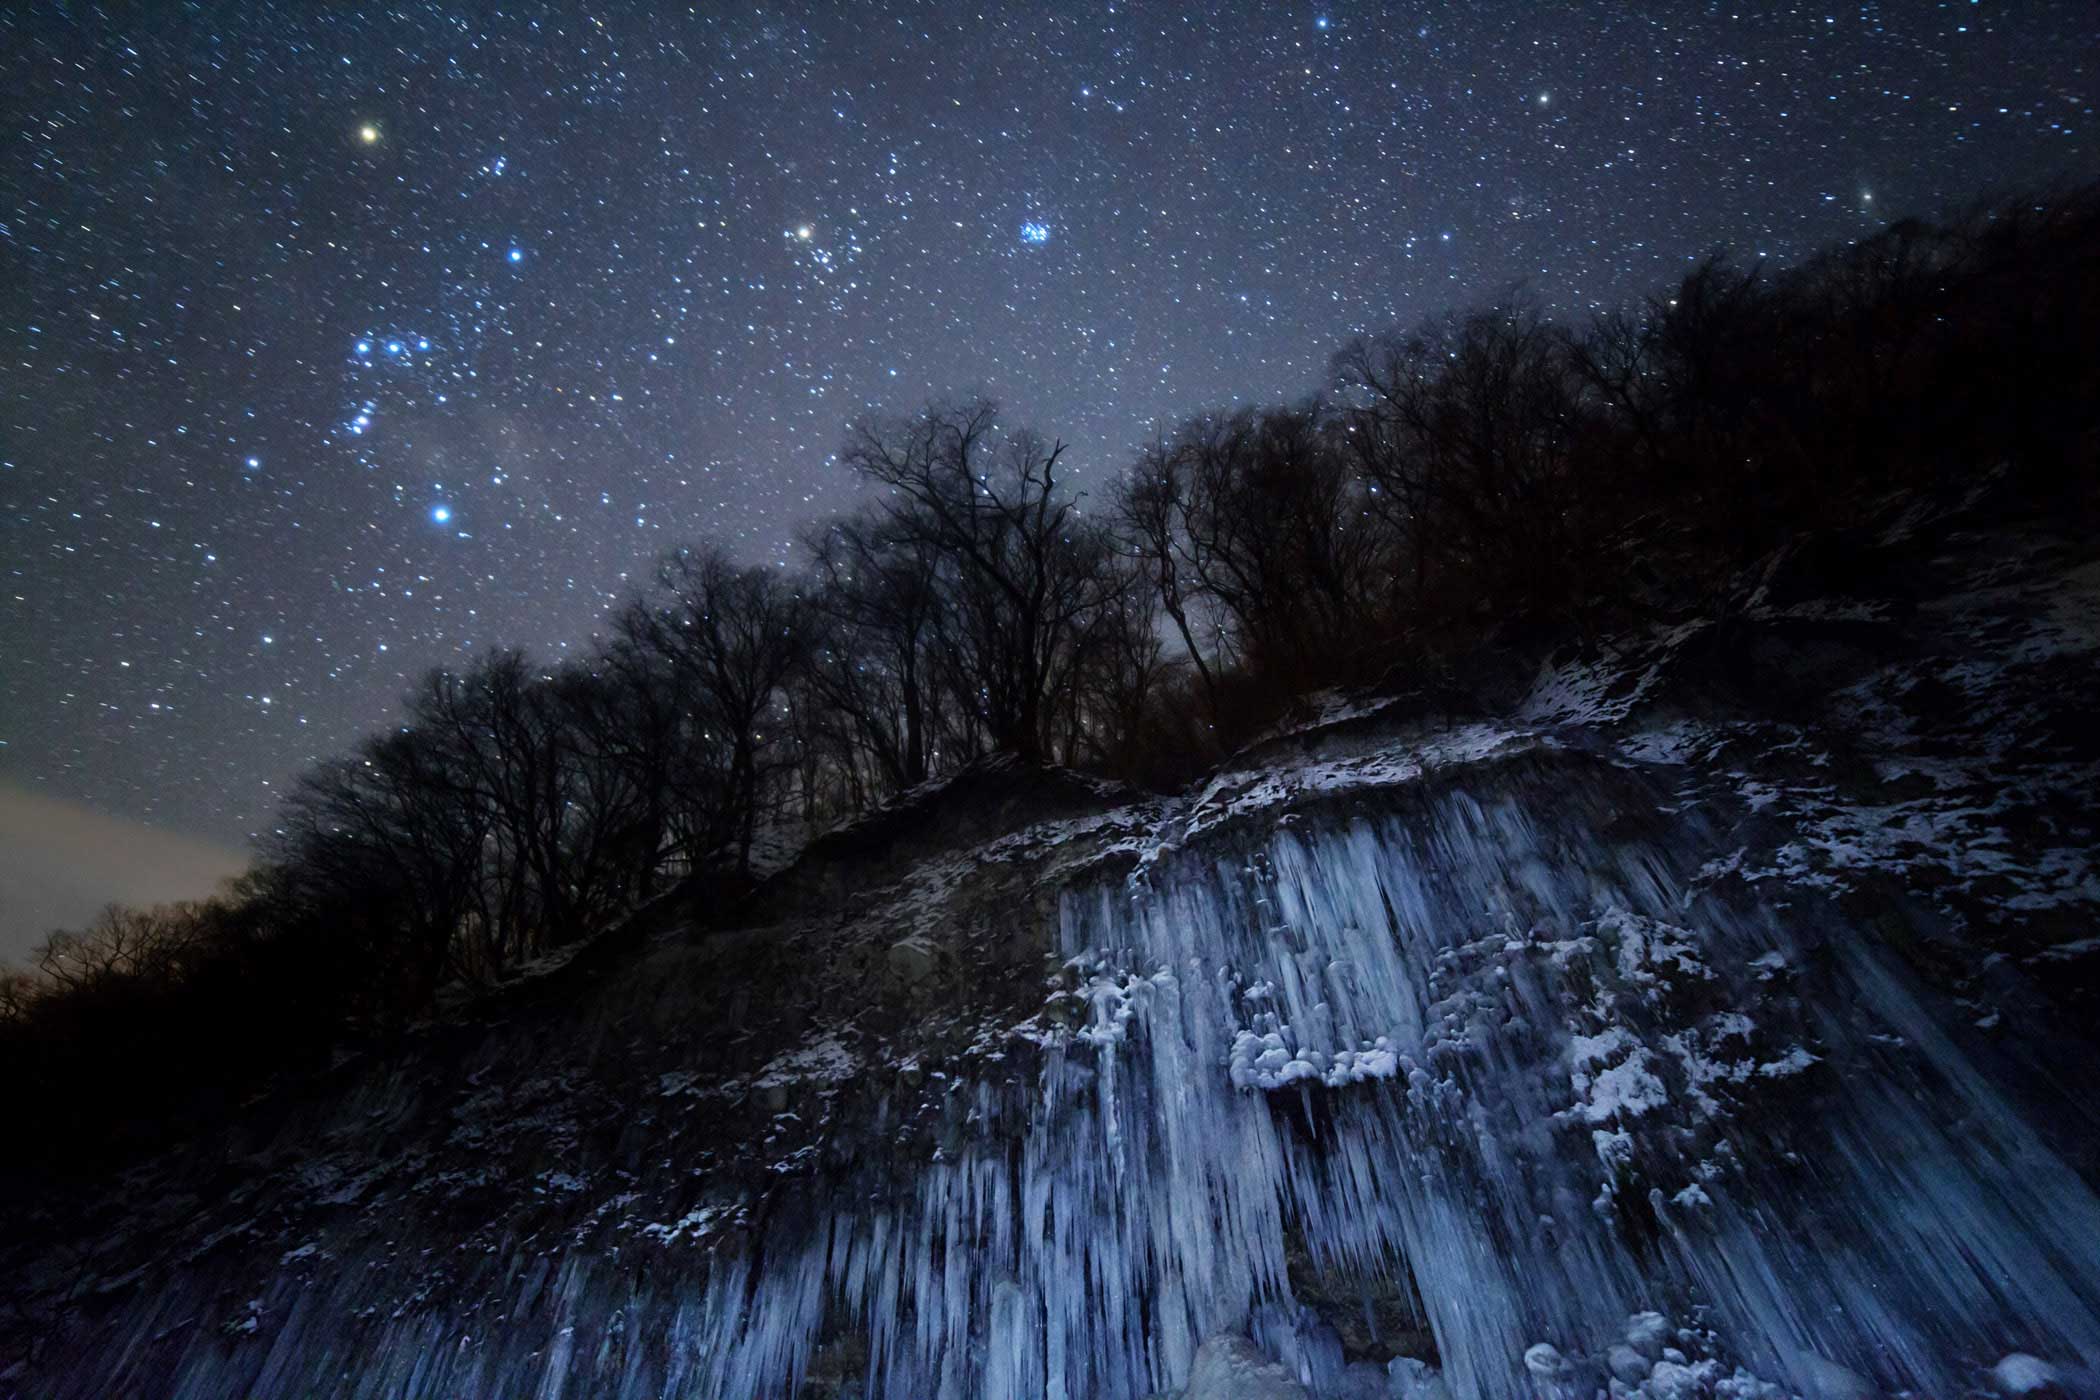 Taken in Nagano, Japan, this image shows Orion, Taurus and the Pleiades as the backdrop to an eerie frozen landscape. Though the stars appear to gleam with a cold, frosty light, bright blue stars like the Pleiades can be as hot as 30,000 degrees Celsius.